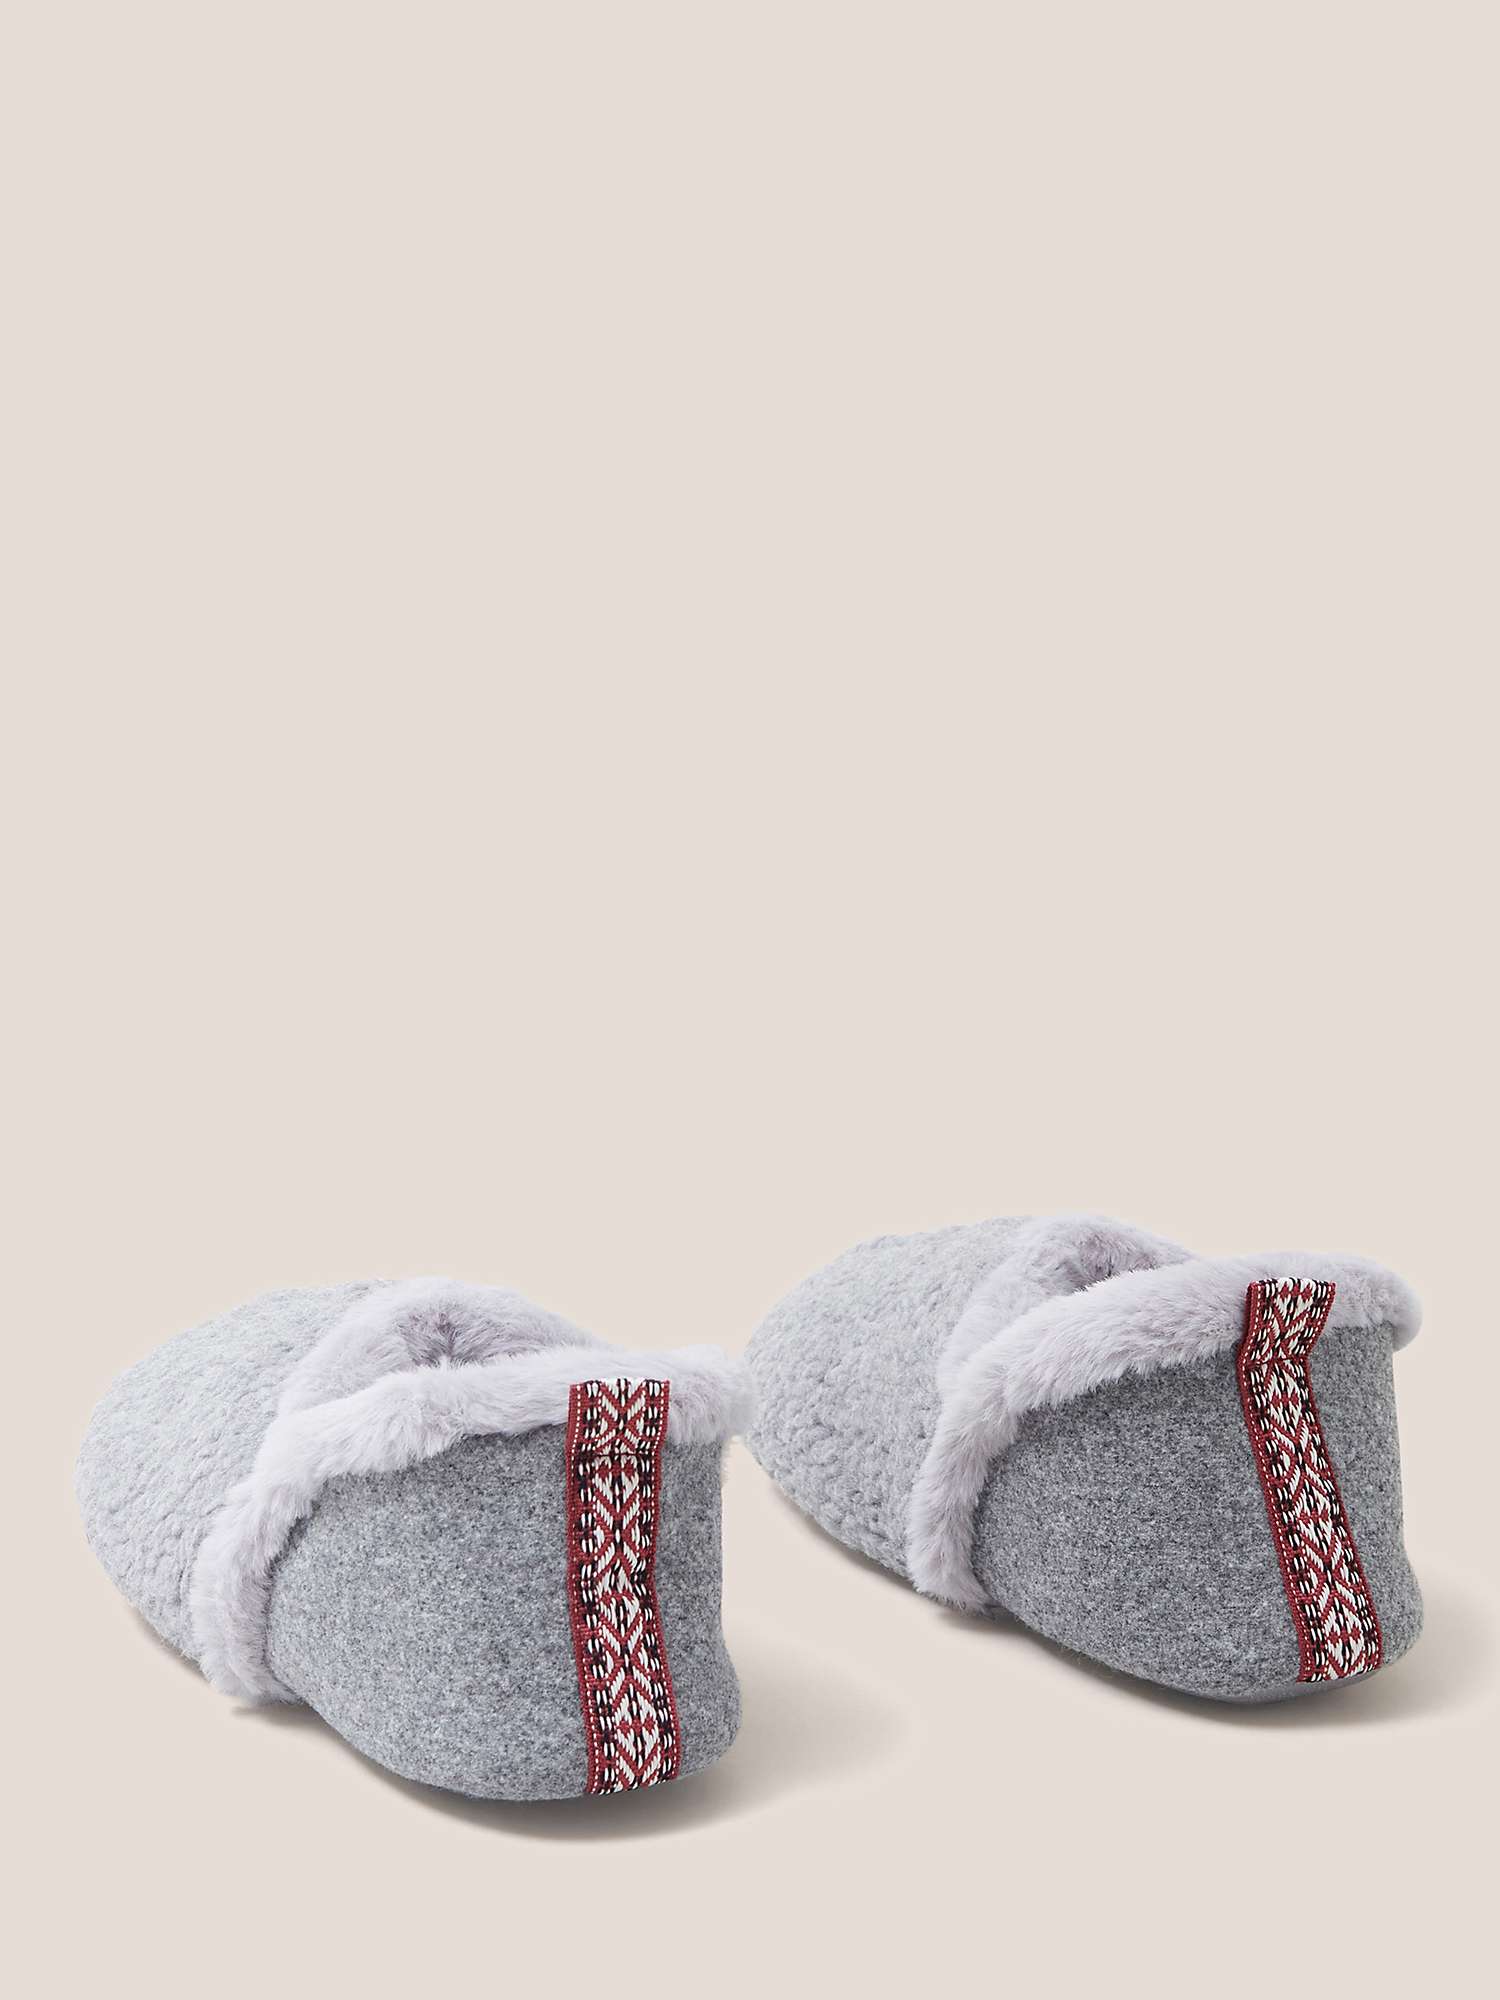 Buy White Stuff Reya Closed Back Slippers, Mid Grey Online at johnlewis.com